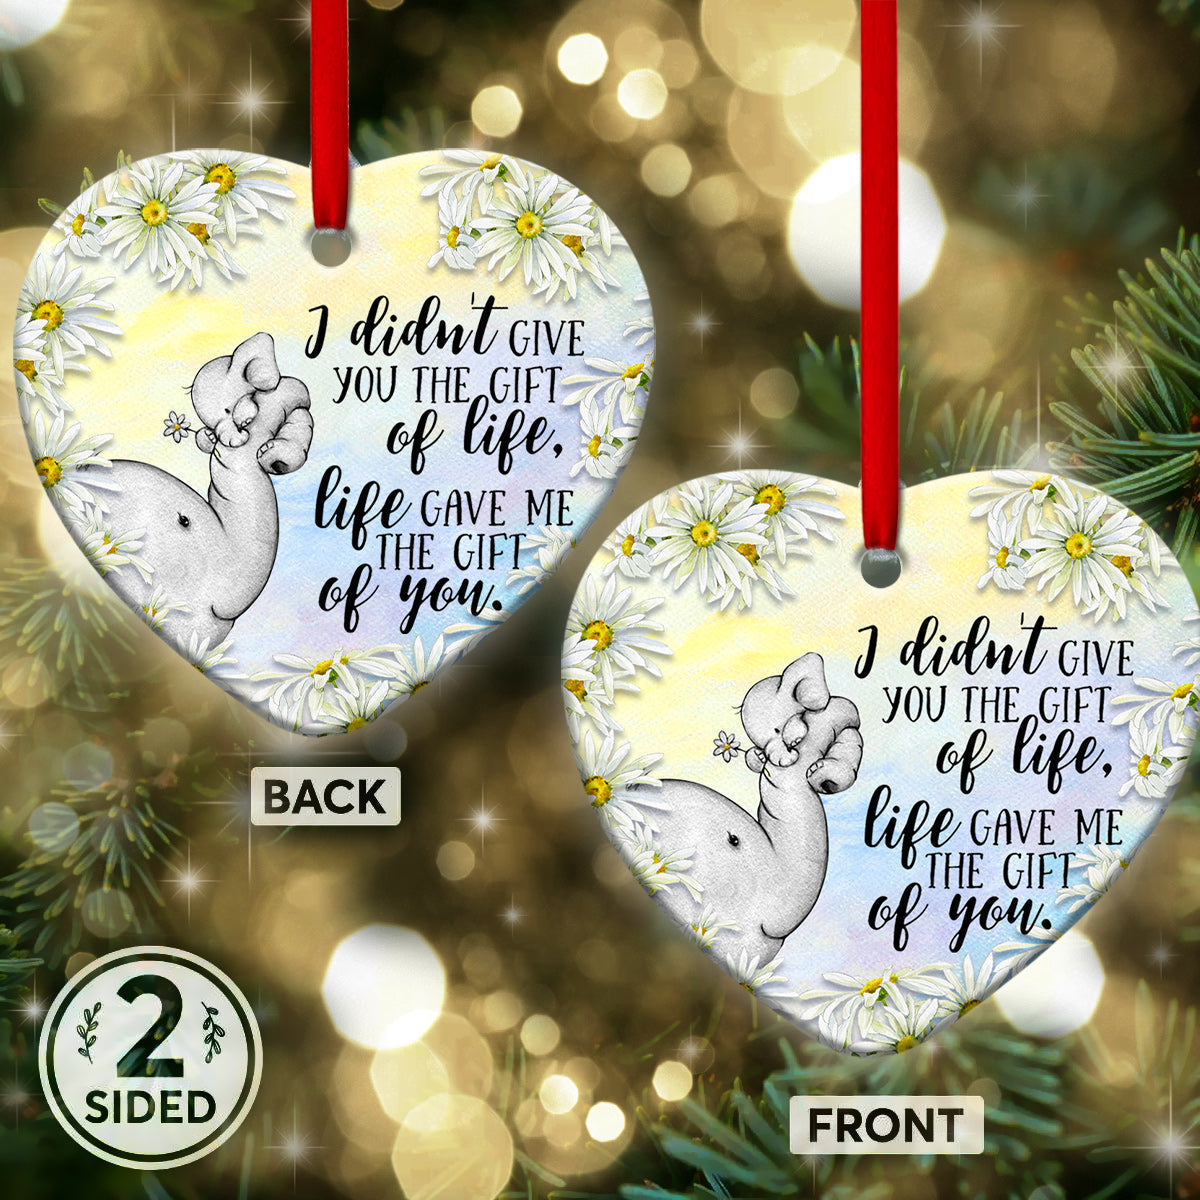 Elephant Family Life Give Me The Gift Of You - Heart Ornament - Owls Matrix LTD